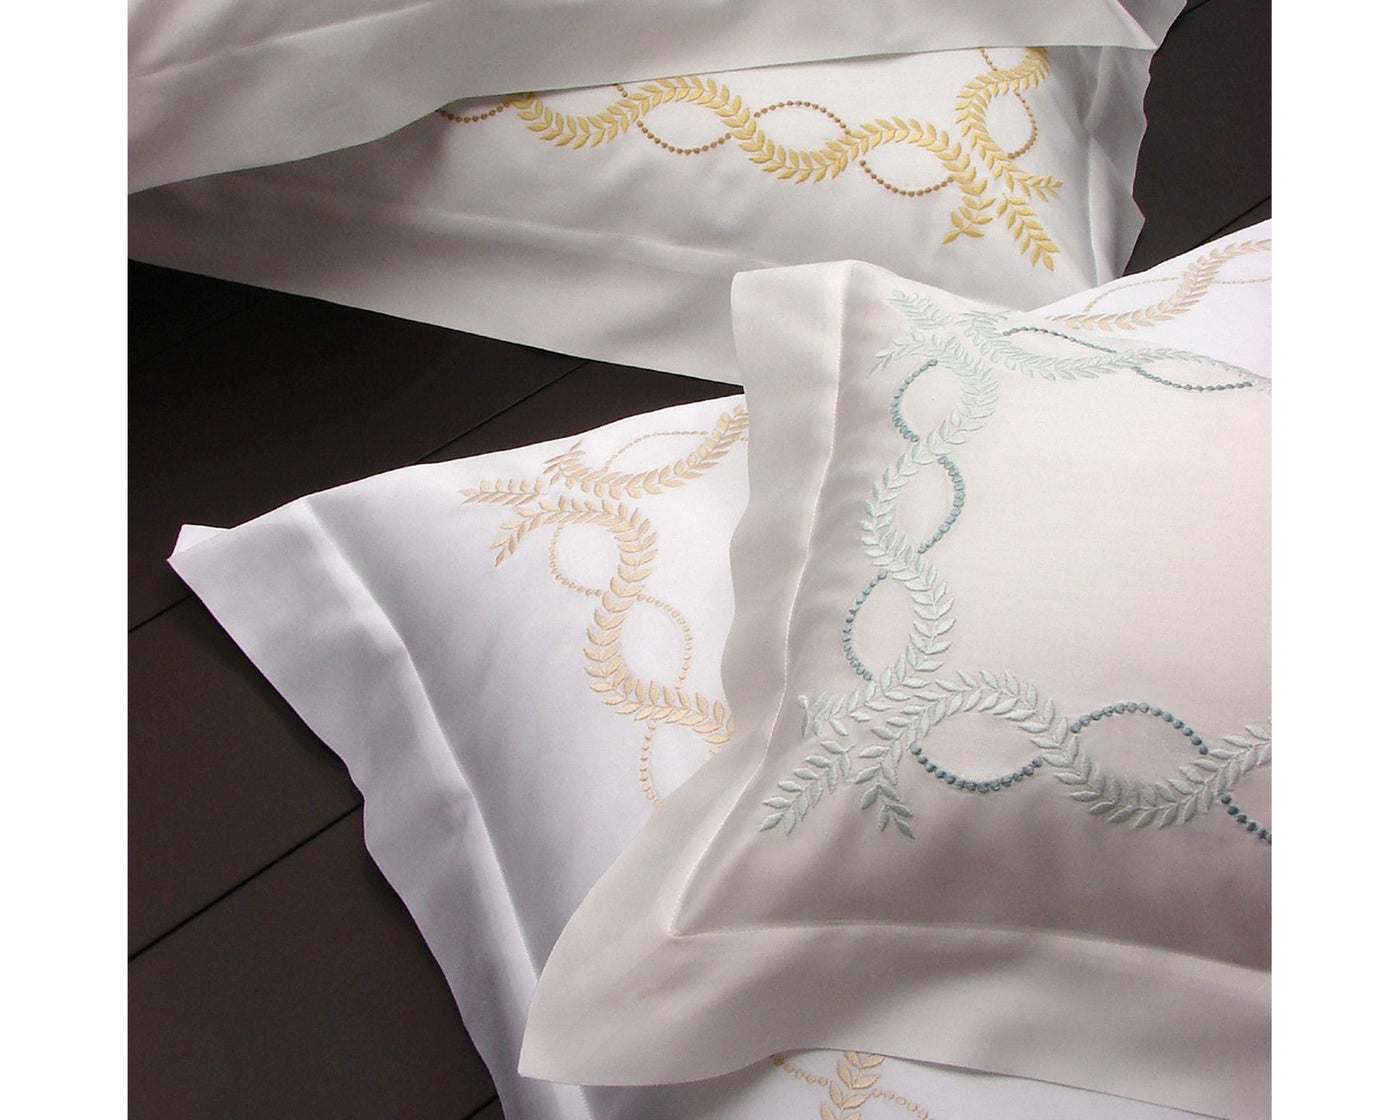 100% cotton Raso sateen with exquisite embroidery